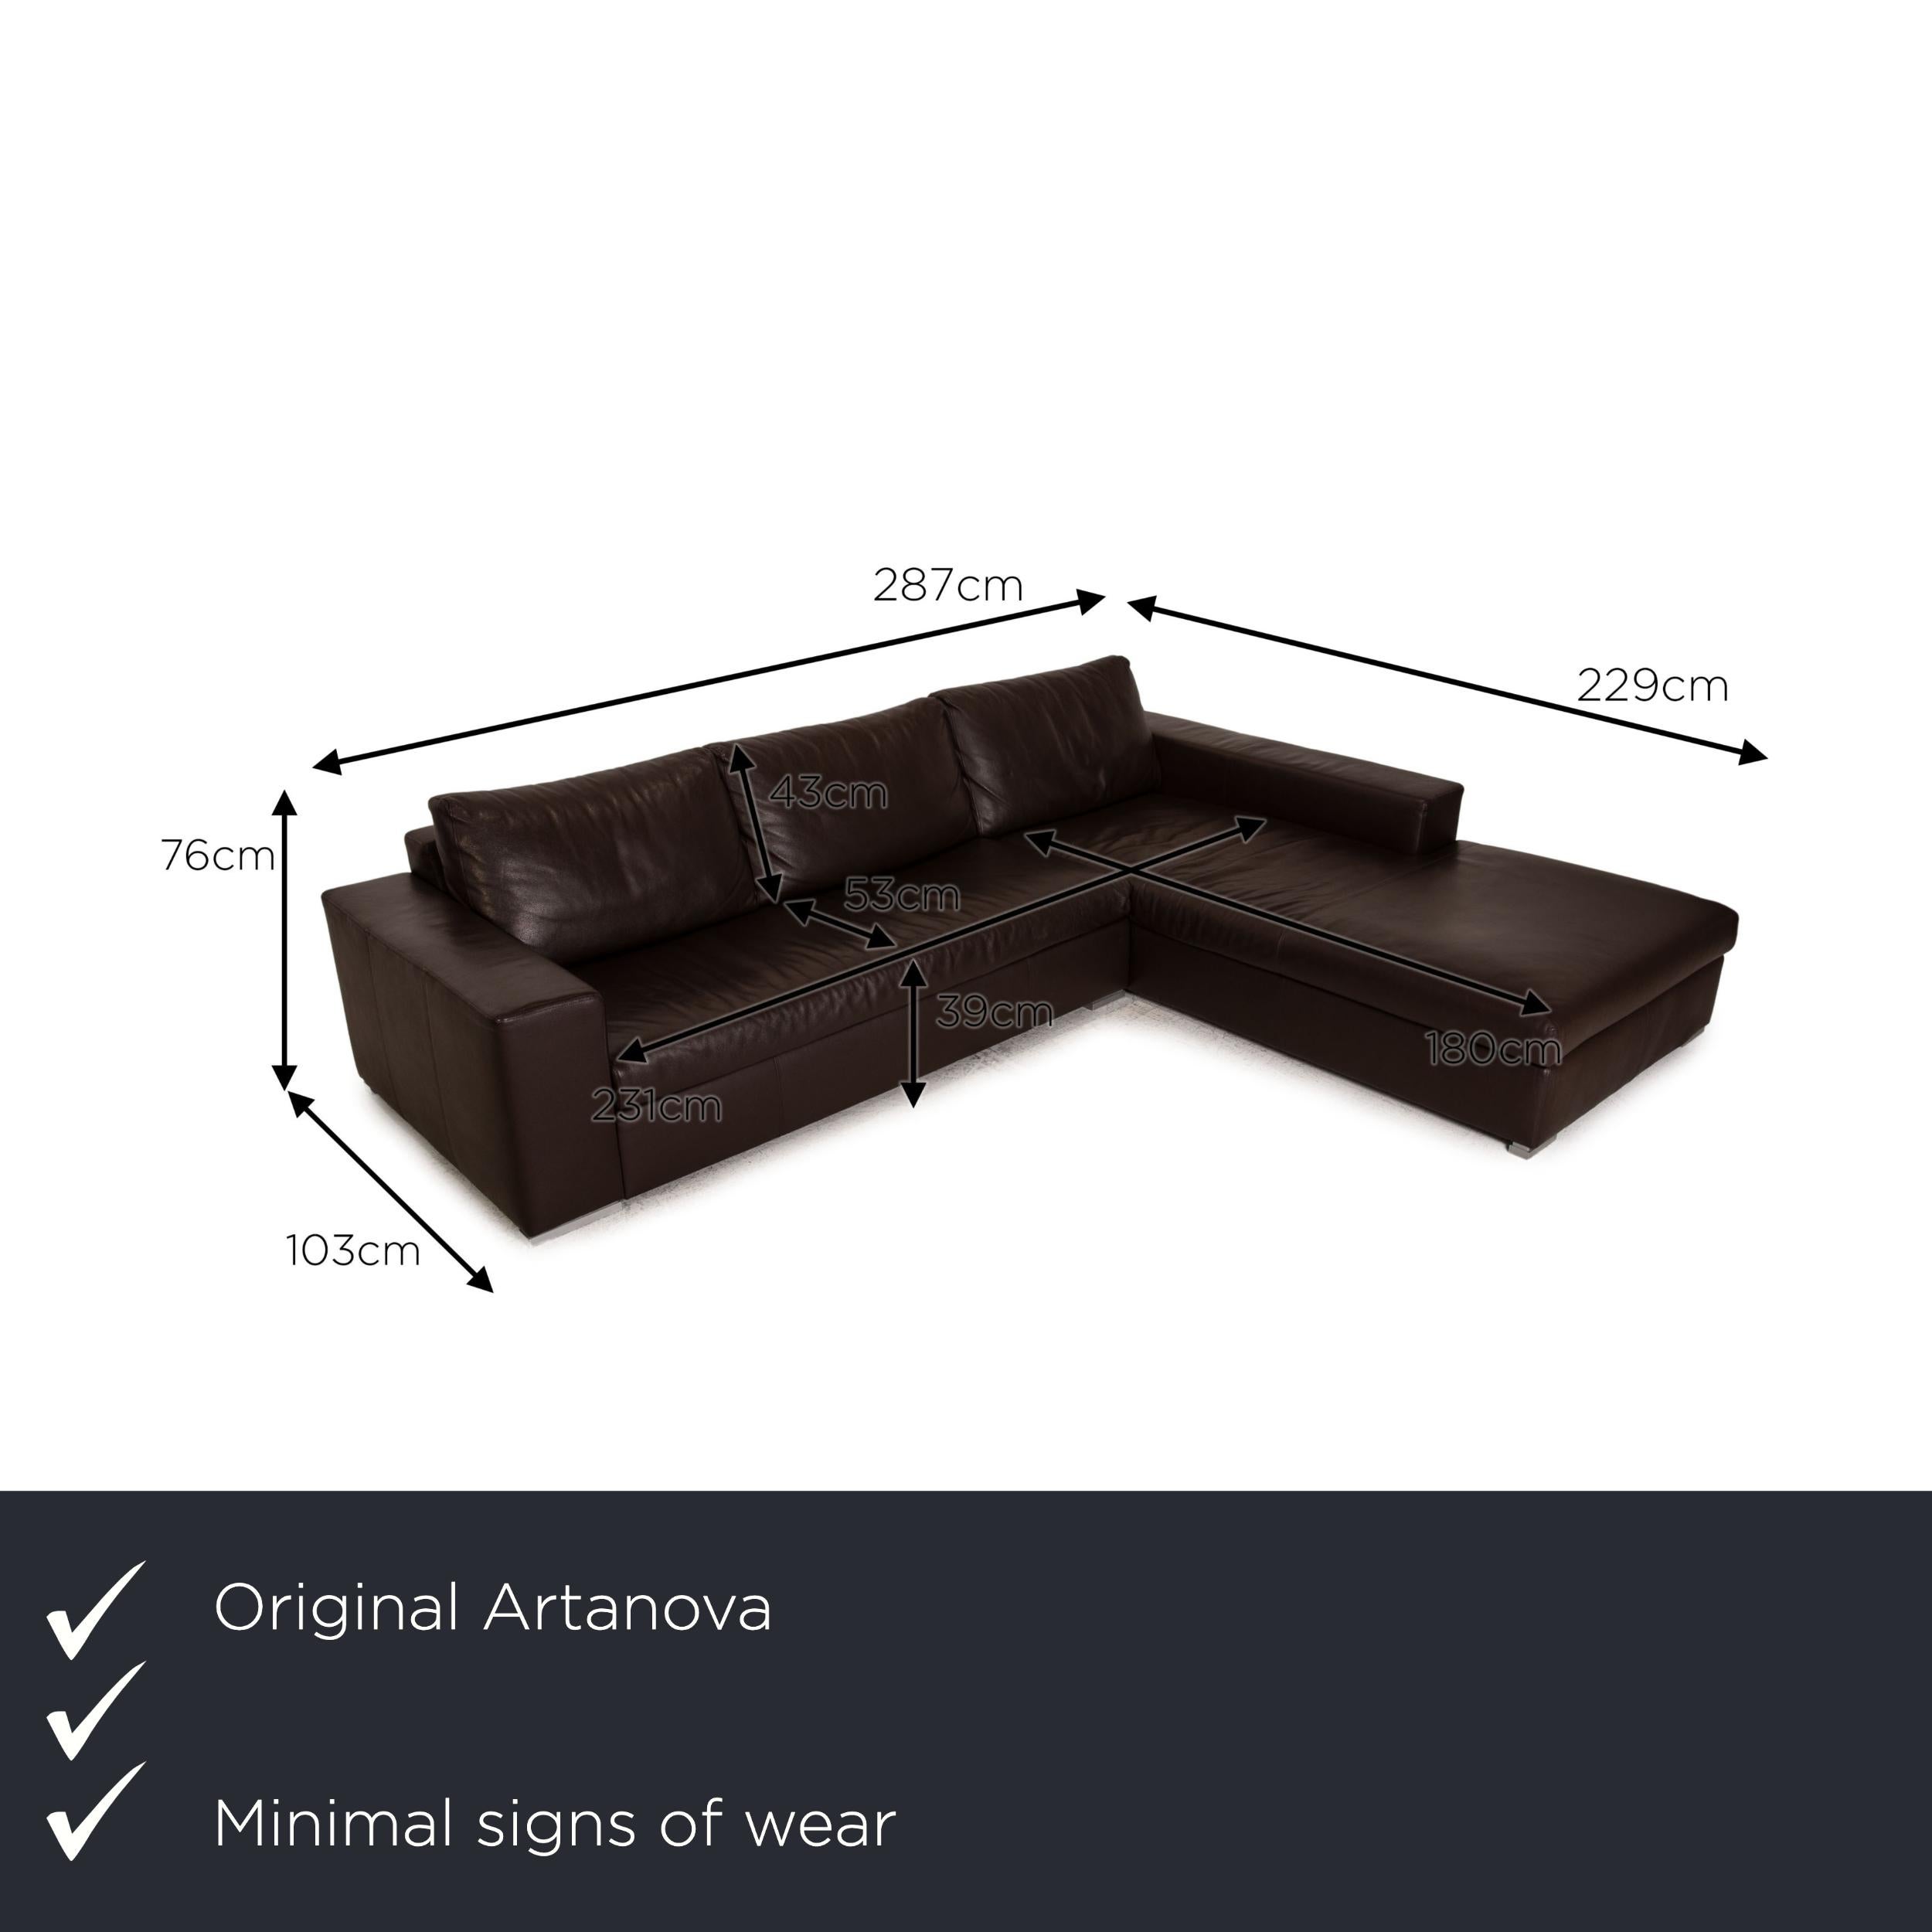 We present to you an Artanova leather sofa brown corner sofa couch.

Product measurements in centimeters:

Depth: 103
Width: 287
Height: 76
Seat height: 39
Rest height: 53
Seat depth: 53
Seat width: 231
Back height: 43.

     